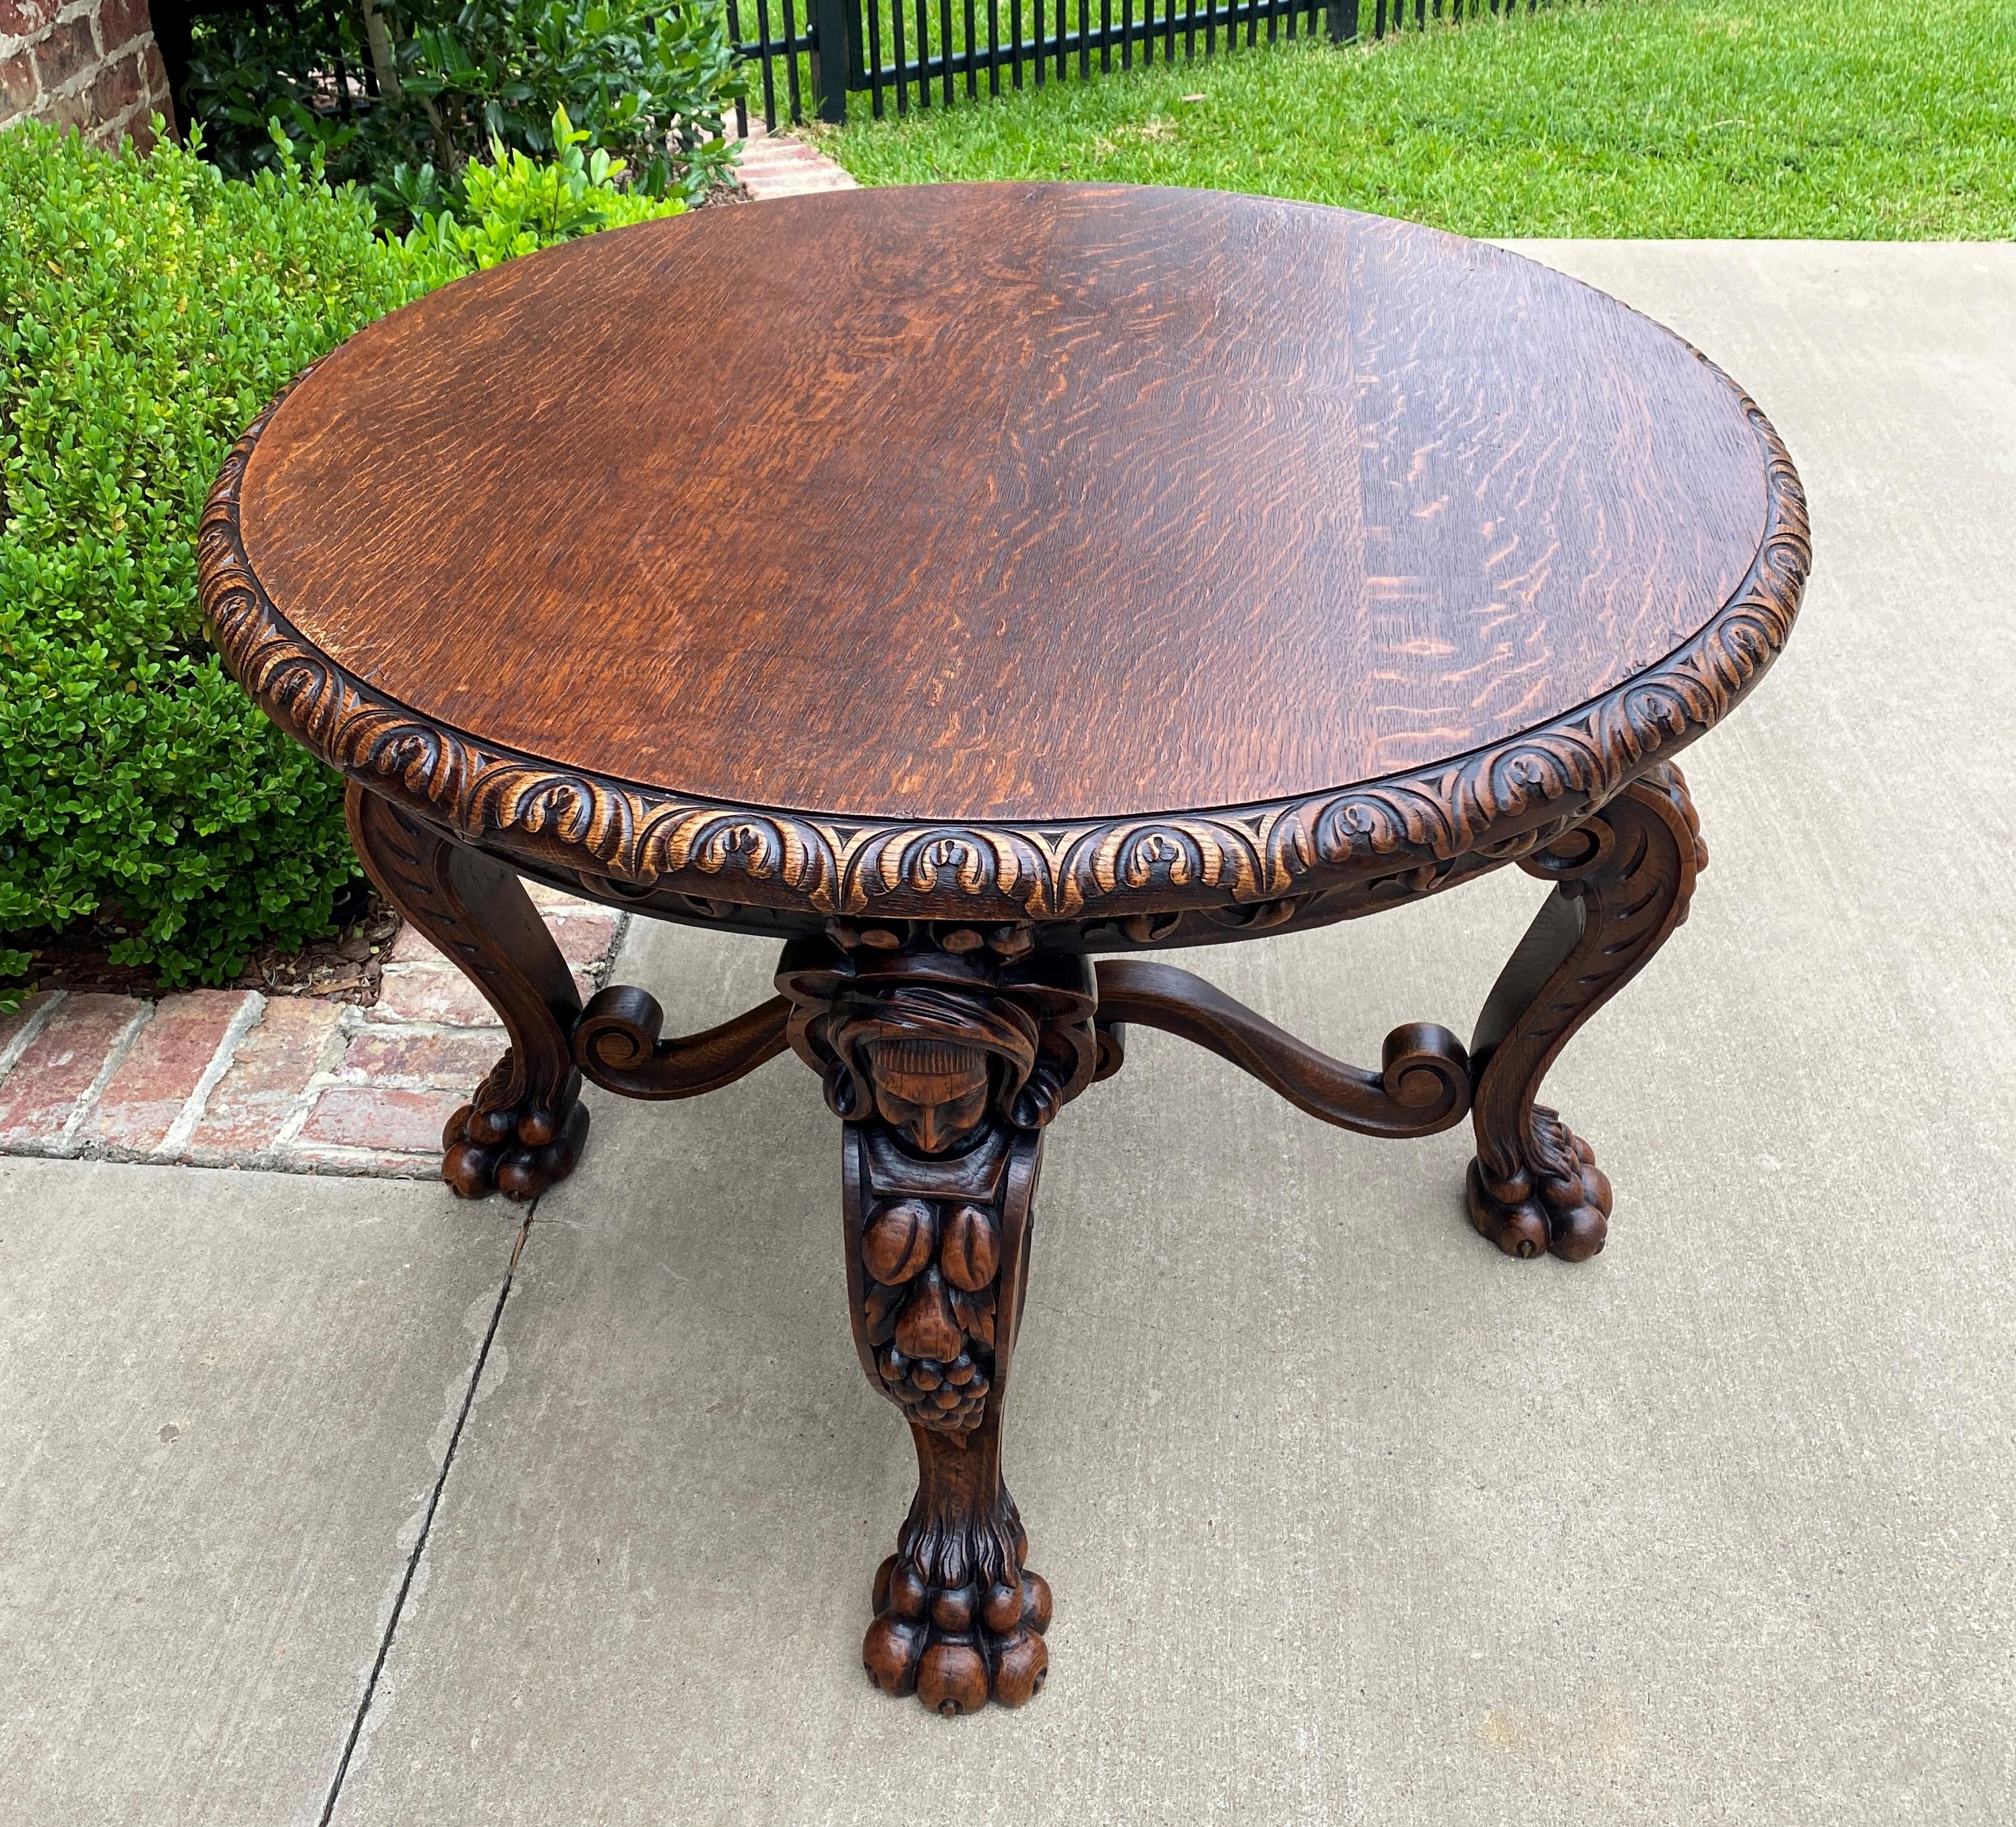 Antique French Round Table Entry Sofa Foyer Coffee Table Renaissance Revival Oak For Sale 2